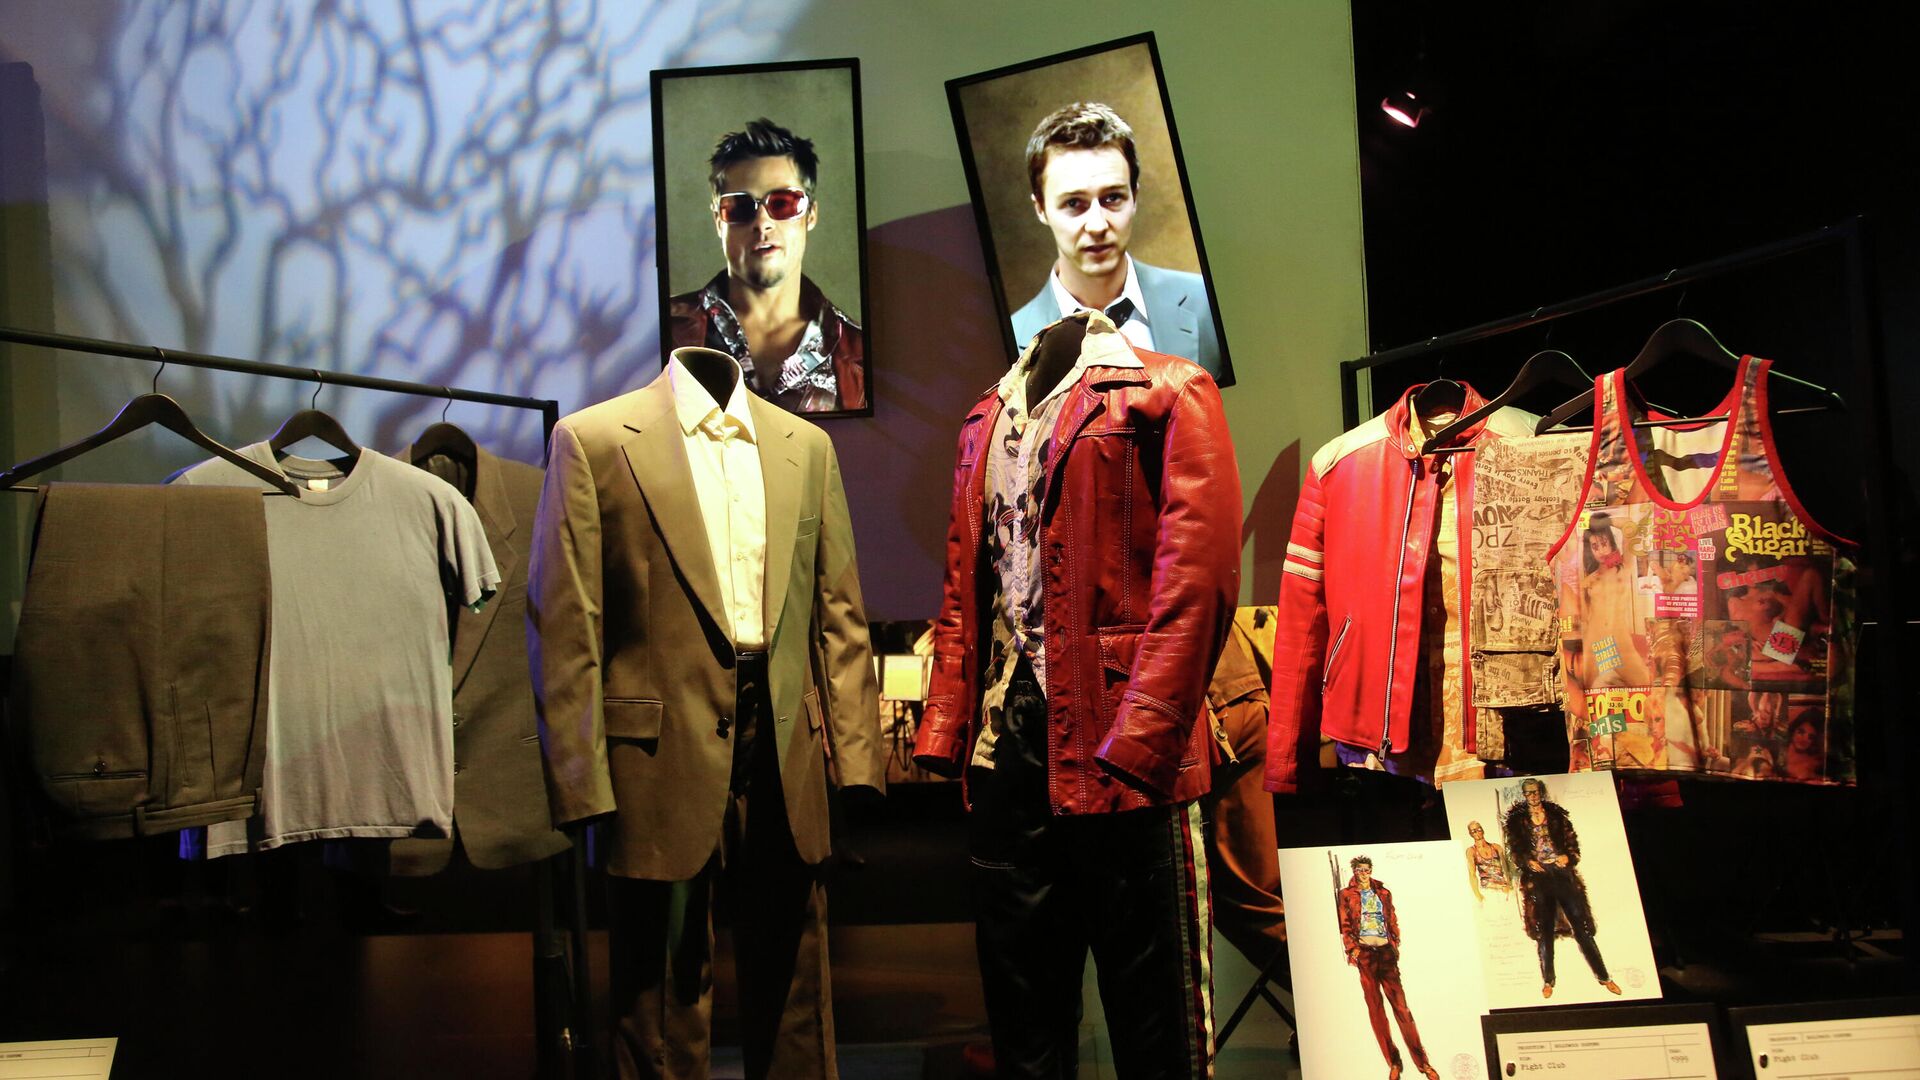 Costumes from the film, Fight Club, worn by Brad Pitt and Edward Norton are on display at the press preview of the Hollywood Costume exhibition Monday, Sept. 29, 2014, in Los Angeles - Sputnik International, 1920, 25.01.2022